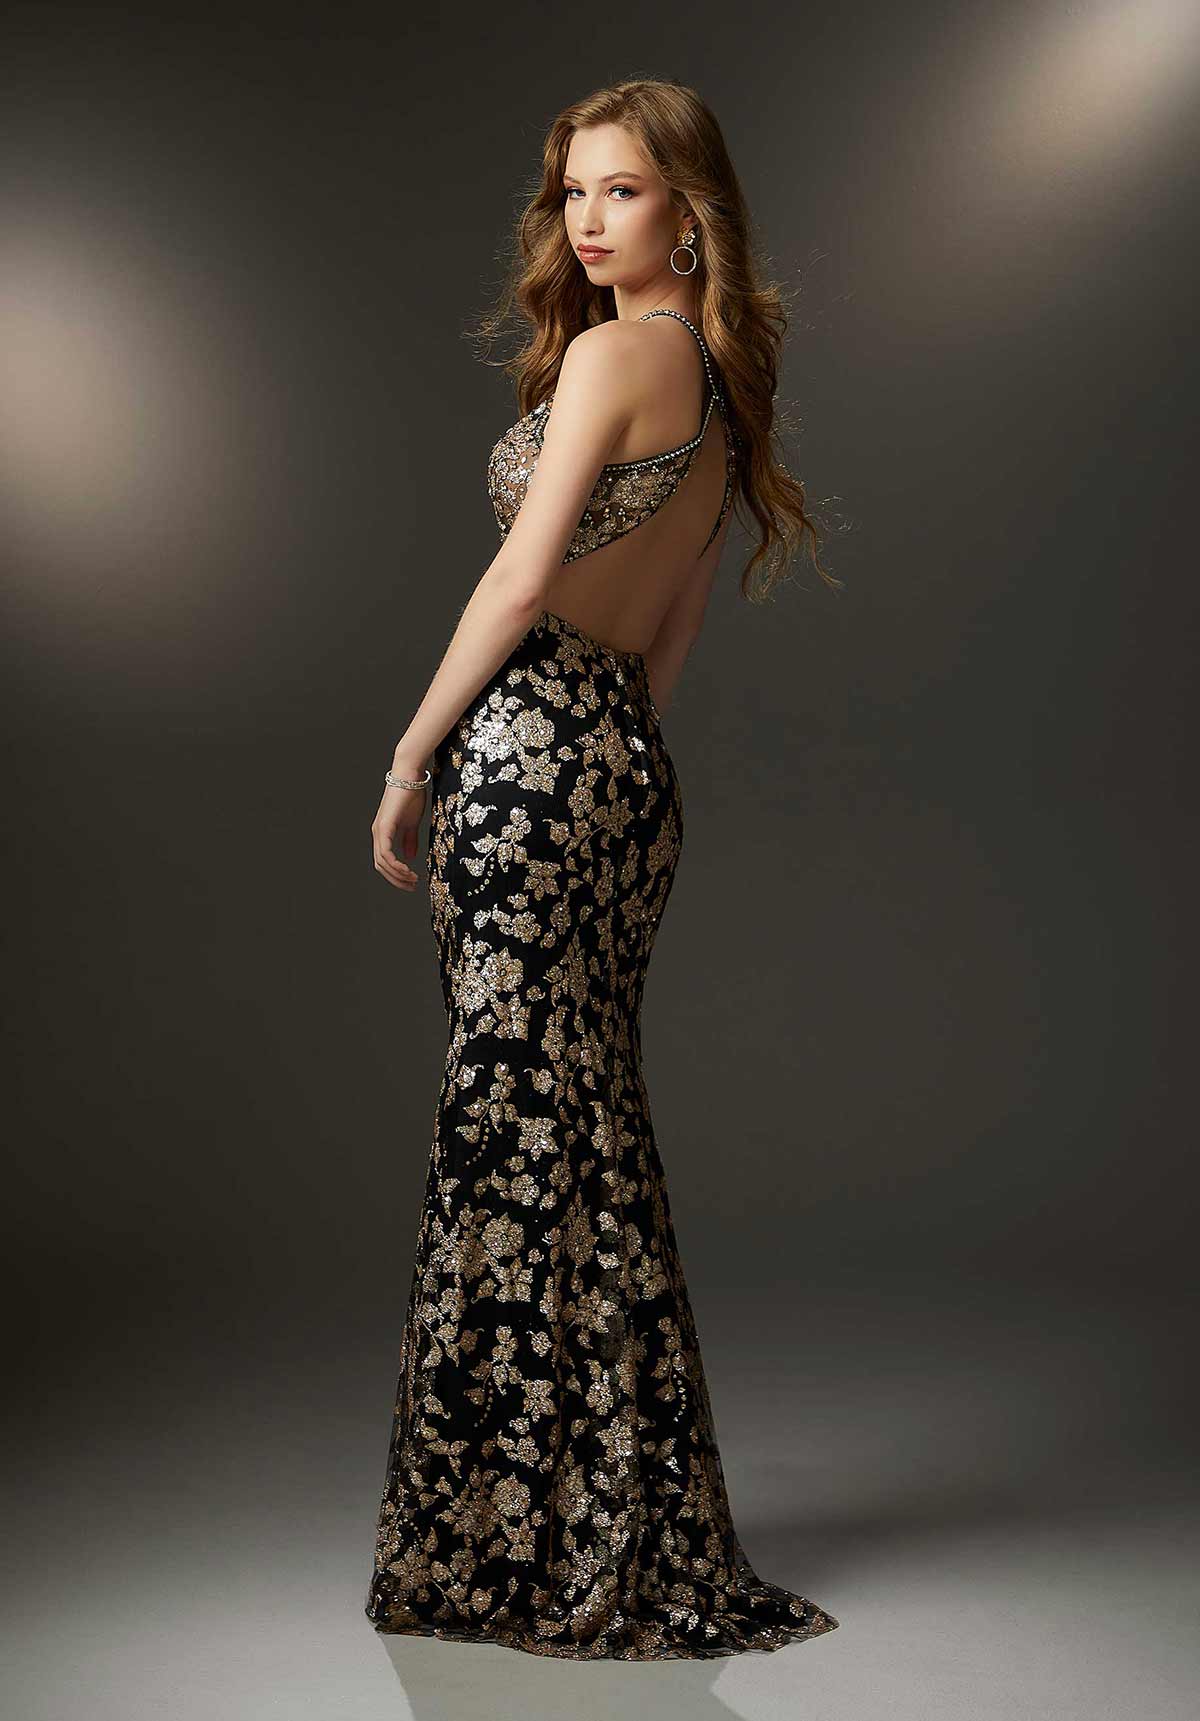 Morilee - 48013 - All Dressed Up, Prom/Party Dress - 00 - Dresses Two Piece Cut Out Sweetheart Halter Low Back High Neck Print Beaded Chiffon Jersey Fitted Sexy Satin Lace Jeweled Sparkle Shimmer Sleeveless Stunning Gorgeous Modest See Through Transparent Glitter Special Occasions Event Chattanooga Hixson Shops Boutiques Tennessee TN Georgia GA MSRP Lowest Prices Sale Discount